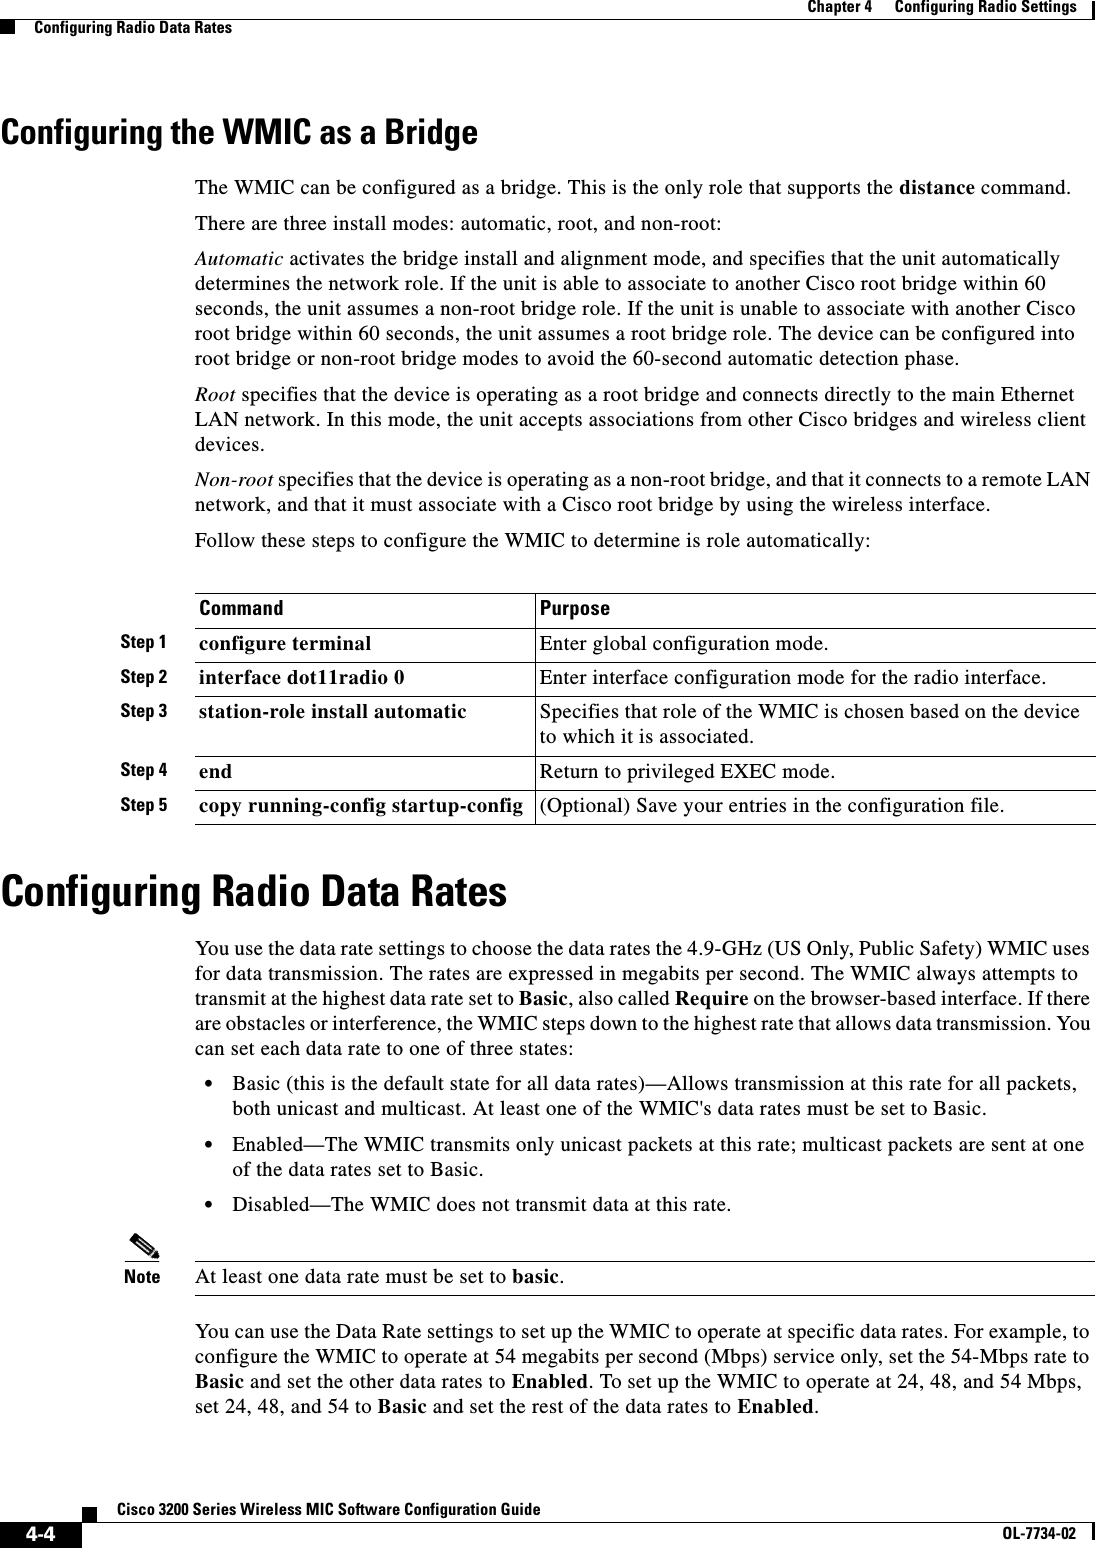 4-4Cisco 3200 Series Wireless MIC Software Configuration GuideOL-7734-02Chapter 4      Configuring Radio SettingsConfiguring Radio Data RatesConfiguring the WMIC as a BridgeThe WMIC can be configured as a bridge. This is the only role that supports the distance command. There are three install modes: automatic, root, and non-root:Automatic activates the bridge install and alignment mode, and specifies that the unit automatically determines the network role. If the unit is able to associate to another Cisco root bridge within 60 seconds, the unit assumes a non-root bridge role. If the unit is unable to associate with another Cisco root bridge within 60 seconds, the unit assumes a root bridge role. The device can be configured into root bridge or non-root bridge modes to avoid the 60-second automatic detection phase.Root specifies that the device is operating as a root bridge and connects directly to the main Ethernet LAN network. In this mode, the unit accepts associations from other Cisco bridges and wireless client devices.Non-root specifies that the device is operating as a non-root bridge, and that it connects to a remote LAN network, and that it must associate with a Cisco root bridge by using the wireless interface. Follow these steps to configure the WMIC to determine is role automatically:Configuring Radio Data RatesYou use the data rate settings to choose the data rates the 4.9-GHz (US Only, Public Safety) WMIC uses for data transmission. The rates are expressed in megabits per second. The WMIC always attempts to transmit at the highest data rate set to Basic, also called Require on the browser-based interface. If there are obstacles or interference, the WMIC steps down to the highest rate that allows data transmission. You can set each data rate to one of three states: •Basic (this is the default state for all data rates)—Allows transmission at this rate for all packets, both unicast and multicast. At least one of the WMIC&apos;s data rates must be set to Basic. •Enabled—The WMIC transmits only unicast packets at this rate; multicast packets are sent at one of the data rates set to Basic. •Disabled—The WMIC does not transmit data at this rate. Note At least one data rate must be set to basic.You can use the Data Rate settings to set up the WMIC to operate at specific data rates. For example, to configure the WMIC to operate at 54 megabits per second (Mbps) service only, set the 54-Mbps rate to Basic and set the other data rates to Enabled. To set up the WMIC to operate at 24, 48, and 54 Mbps, set 24, 48, and 54 to Basic and set the rest of the data rates to Enabled.Command PurposeStep 1 configure terminal Enter global configuration mode.Step 2 interface dot11radio 0 Enter interface configuration mode for the radio interface.Step 3 station-role install automatic Specifies that role of the WMIC is chosen based on the device to which it is associated. Step 4 end Return to privileged EXEC mode.Step 5 copy running-config startup-config (Optional) Save your entries in the configuration file.